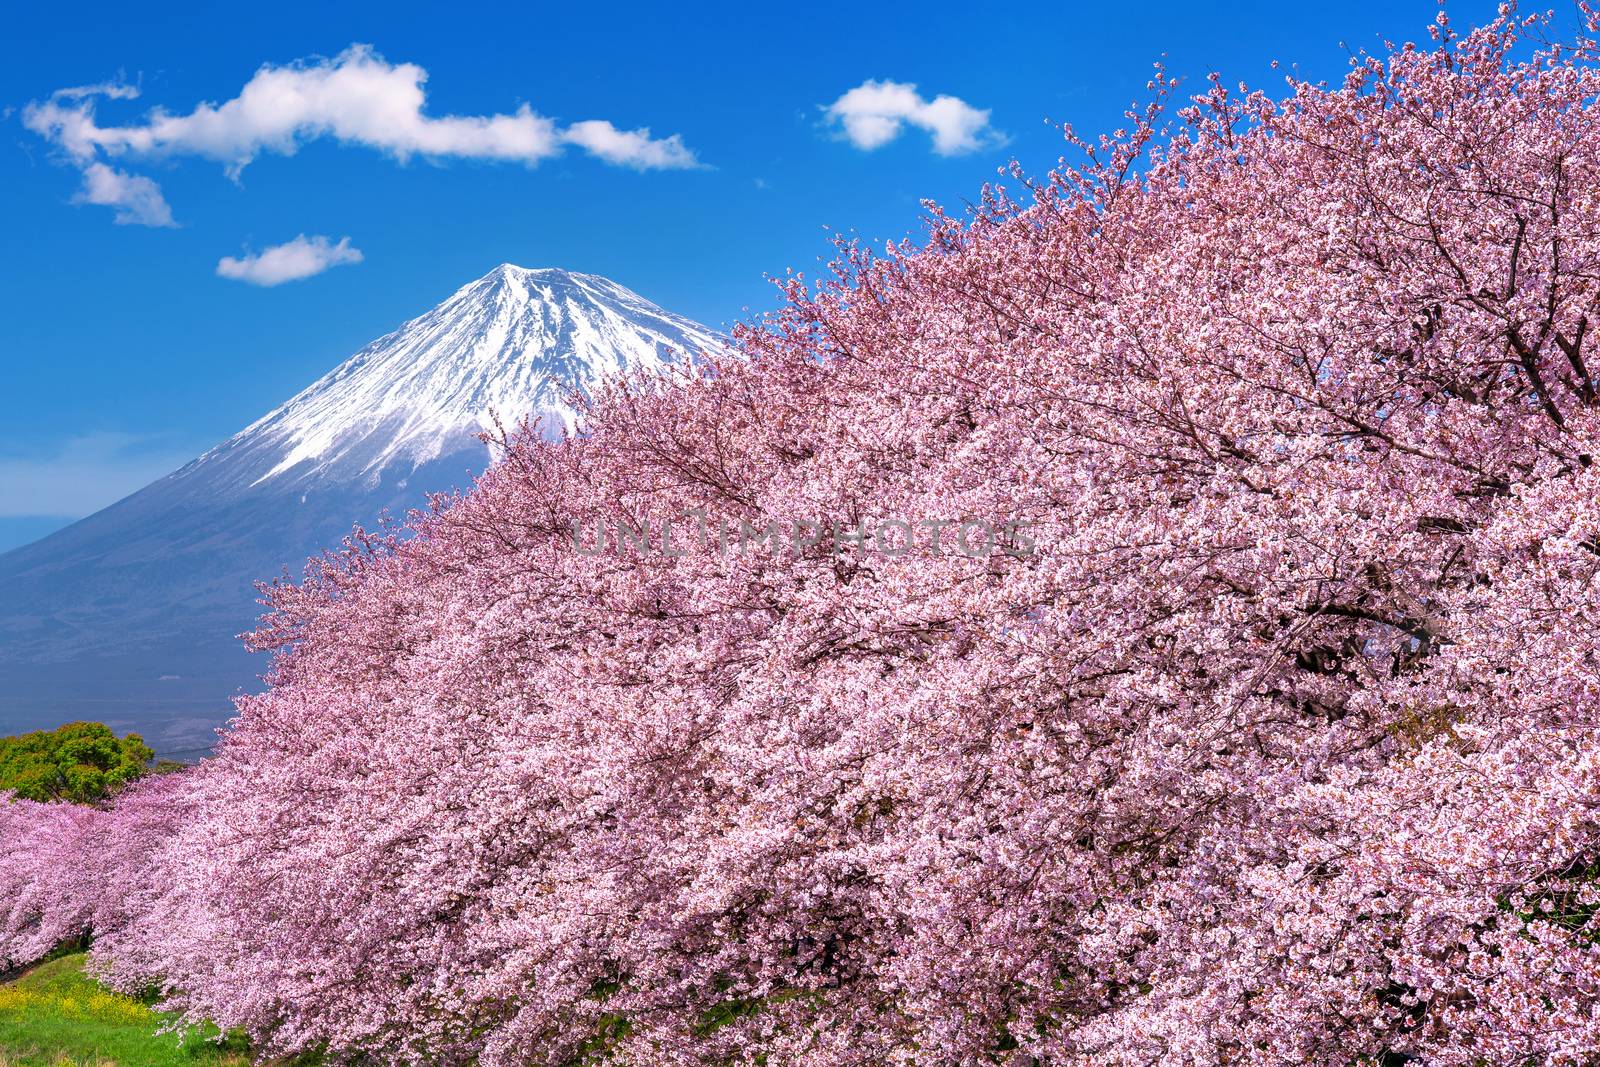 Fuji mountains and  cherry blossoms in spring, Japan.